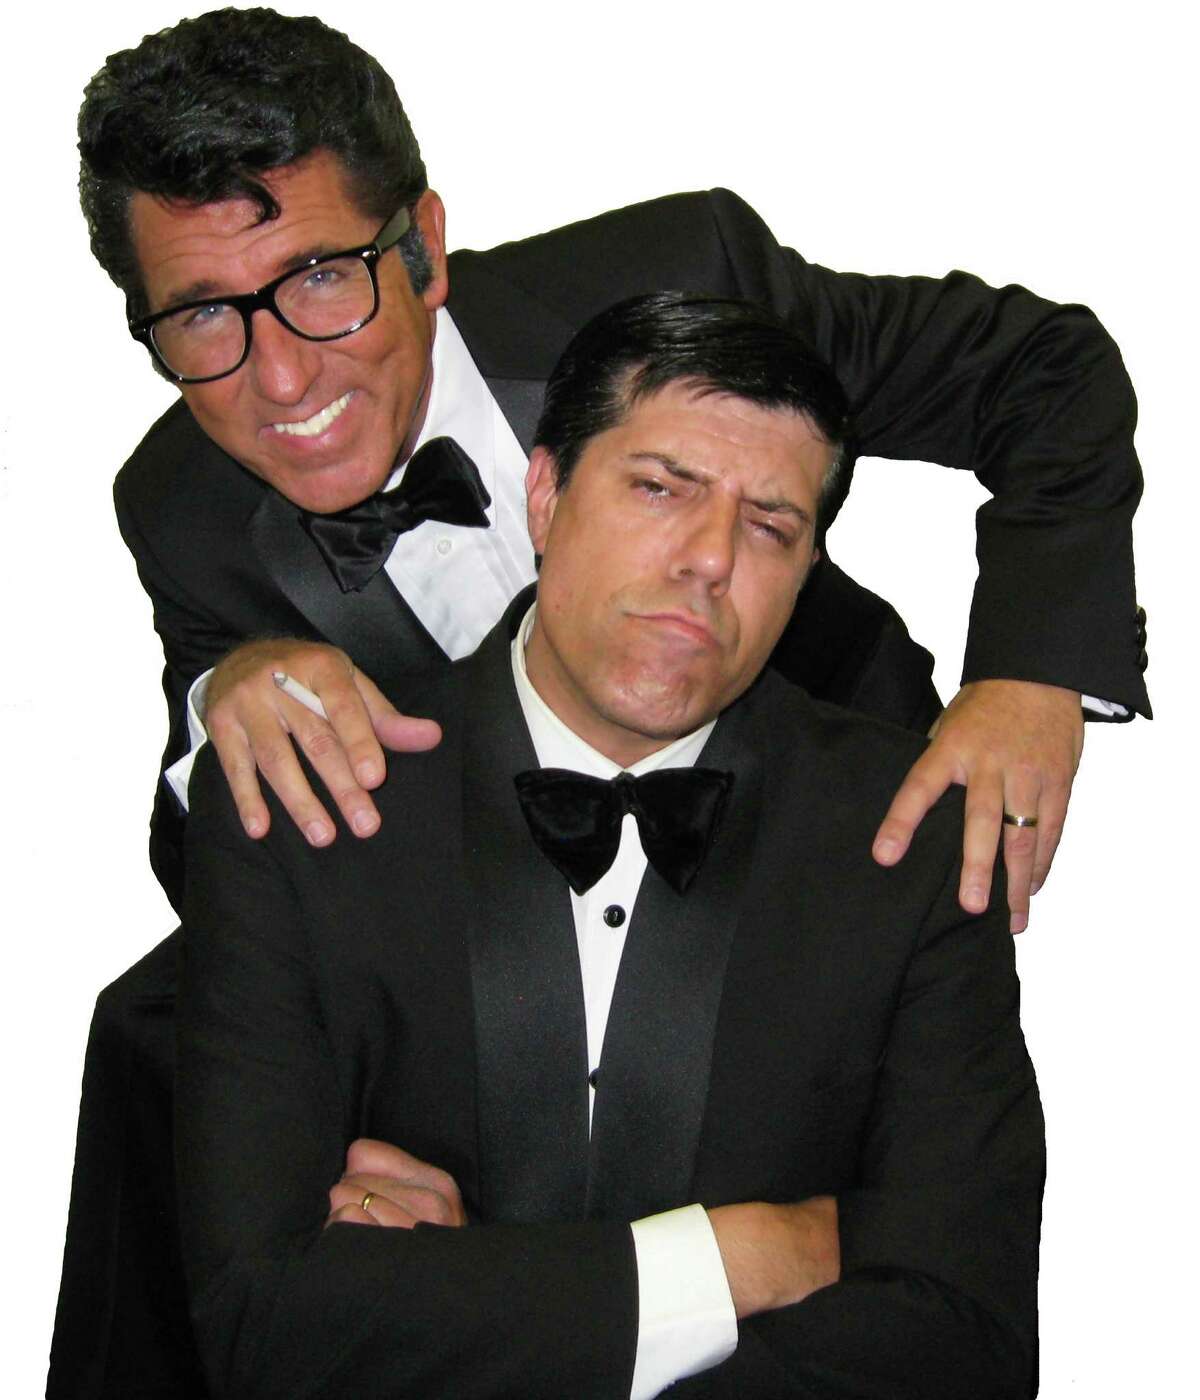 Family comedy is on tap Friday when The Dean Martin & Jerry Lewis Tribute Show comes to the Palace Danbury.